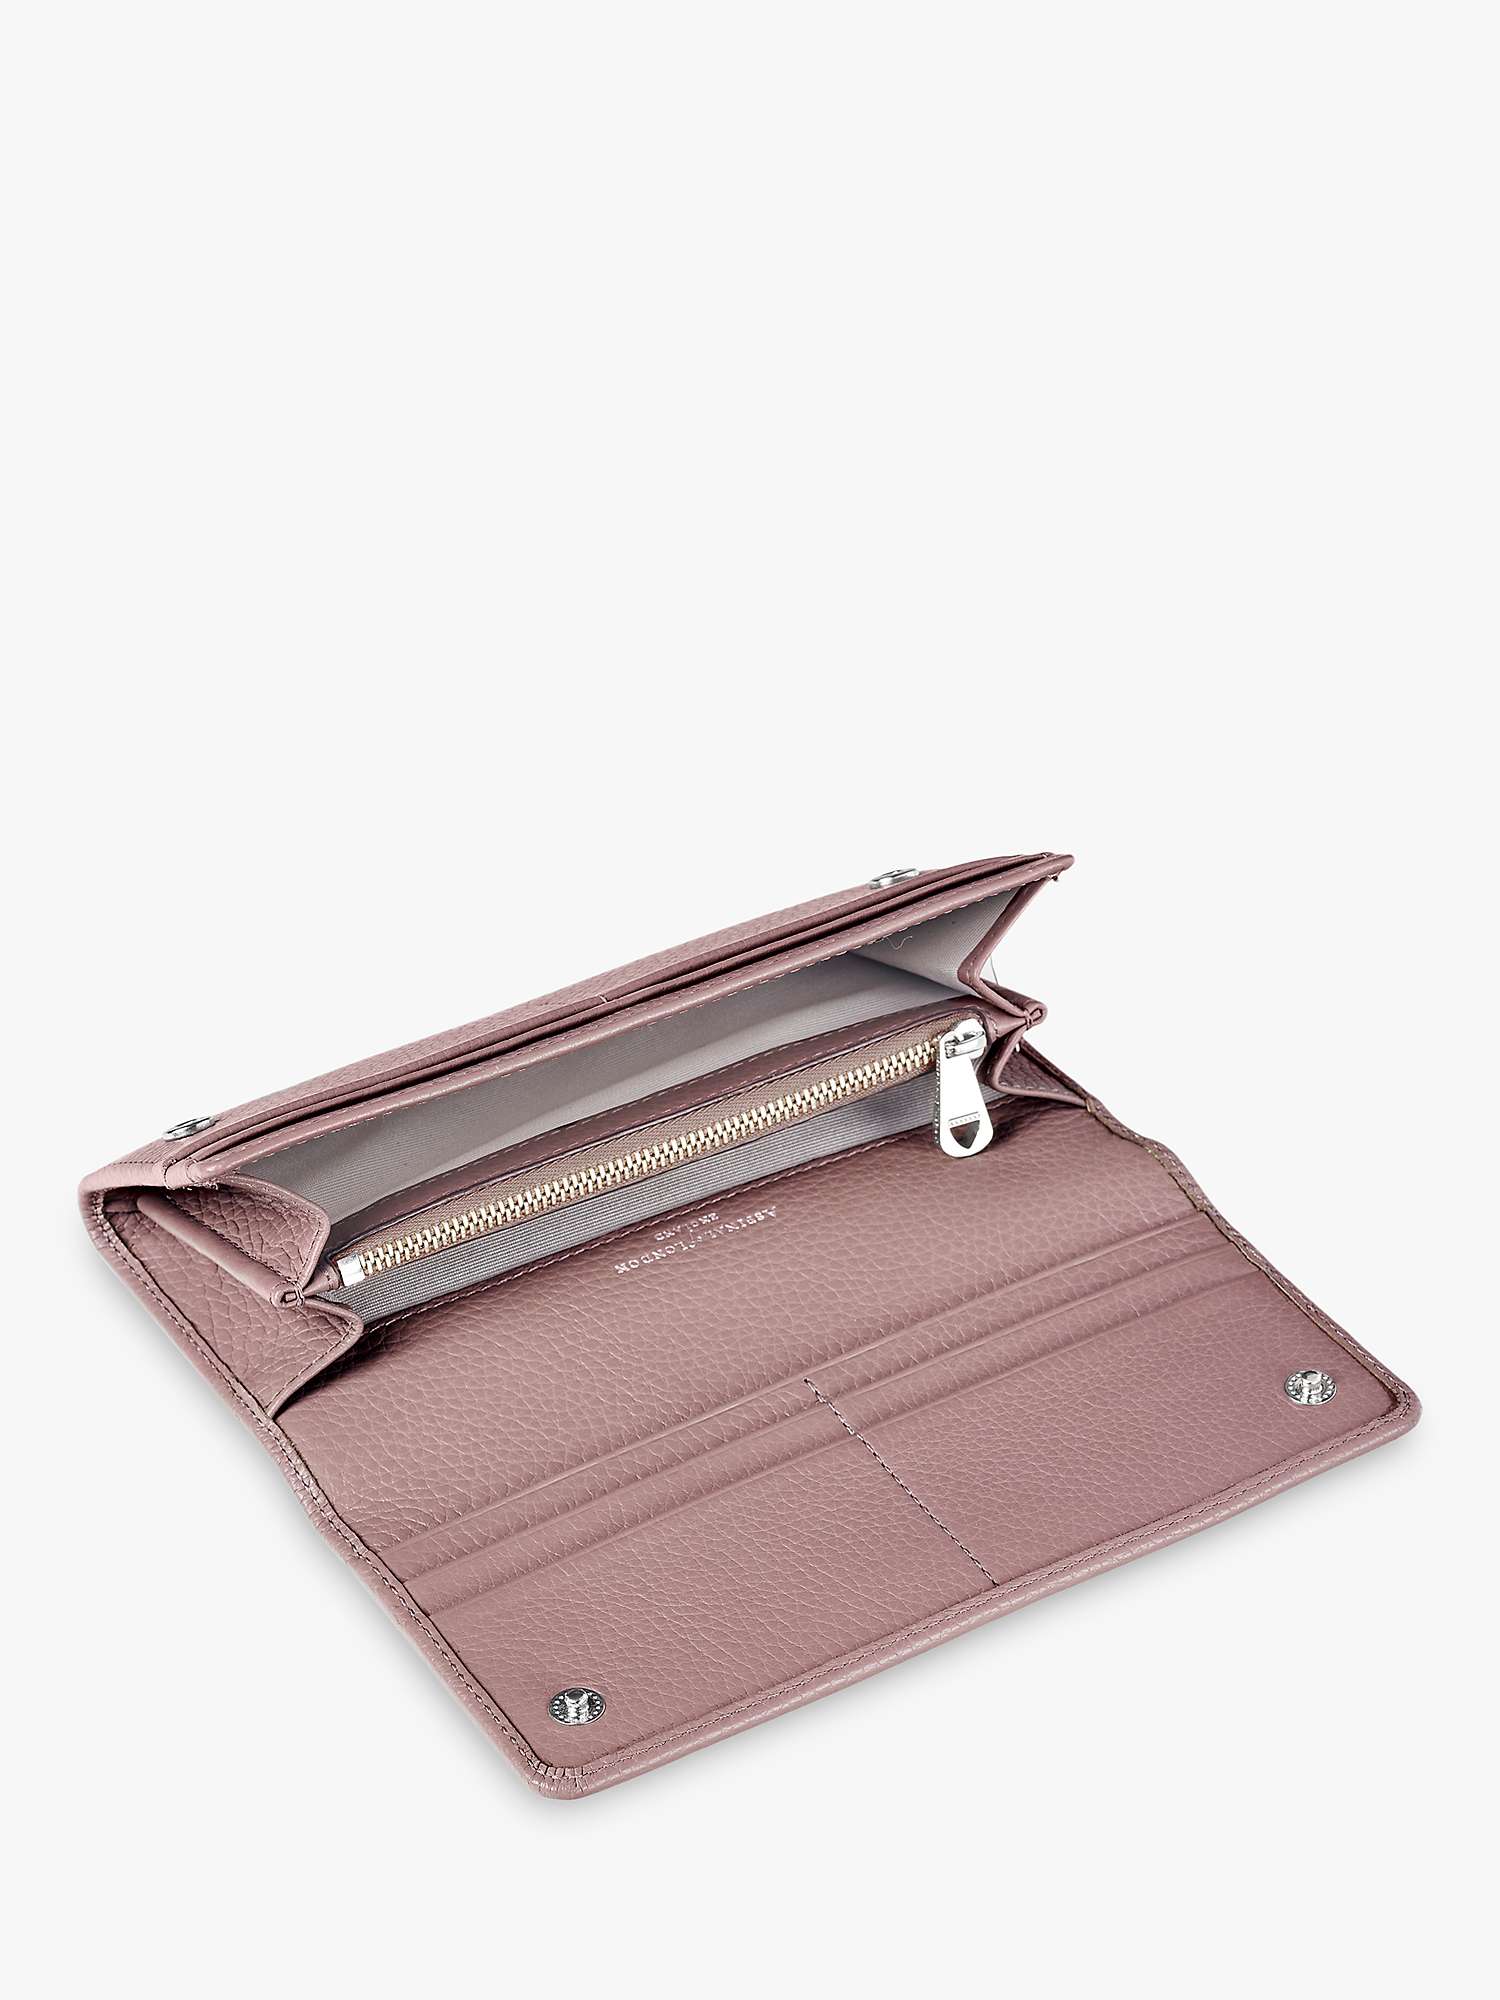 Buy Aspinal of London Pebble Leather London Midi Purse Online at johnlewis.com